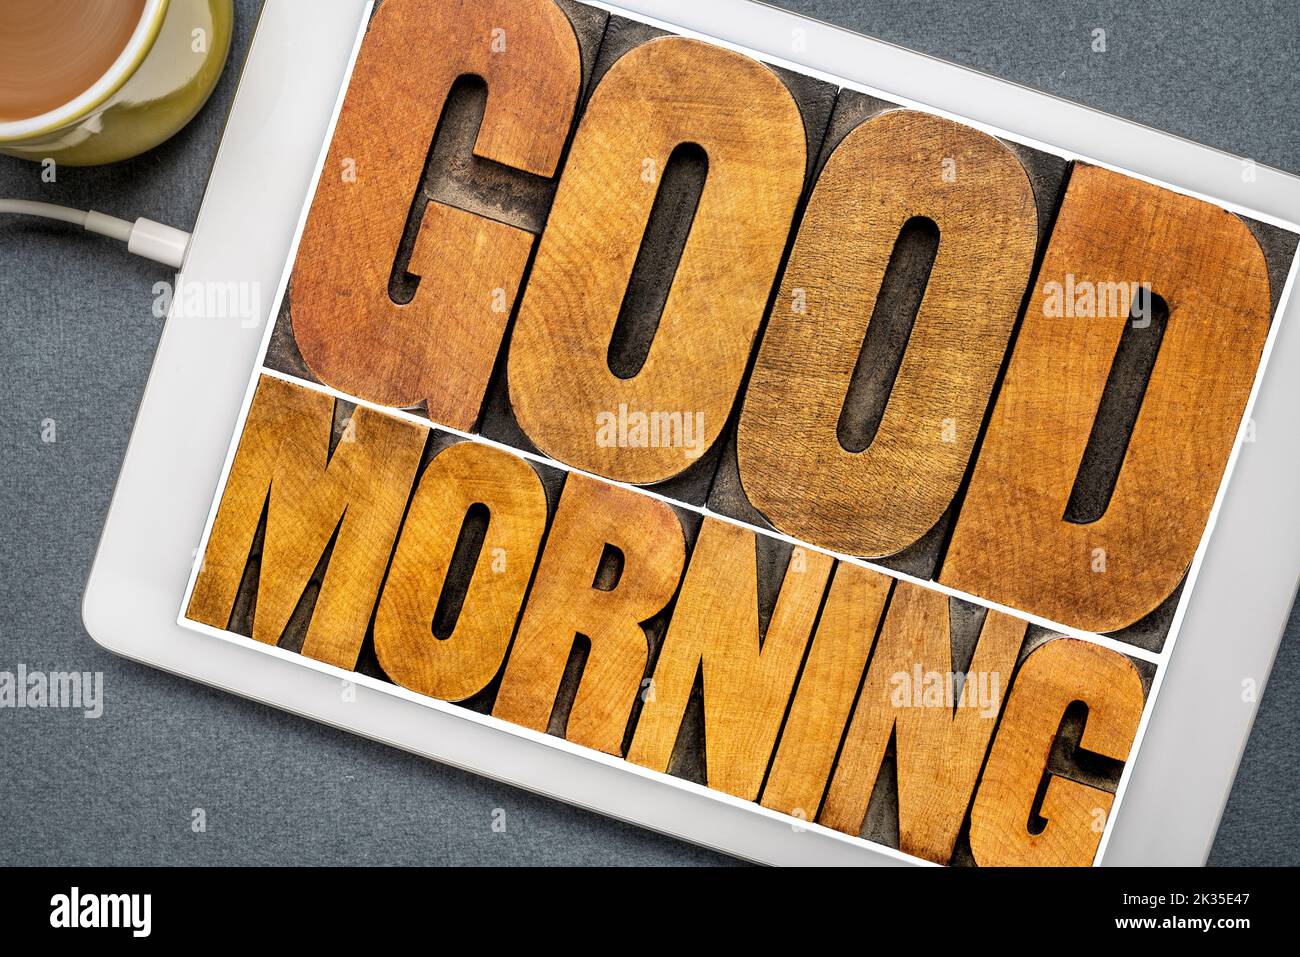 Good Morning word abstract - text in vintage letterpress wood type printing blocks on a digital tablet with a cup of coffee Stock Photo